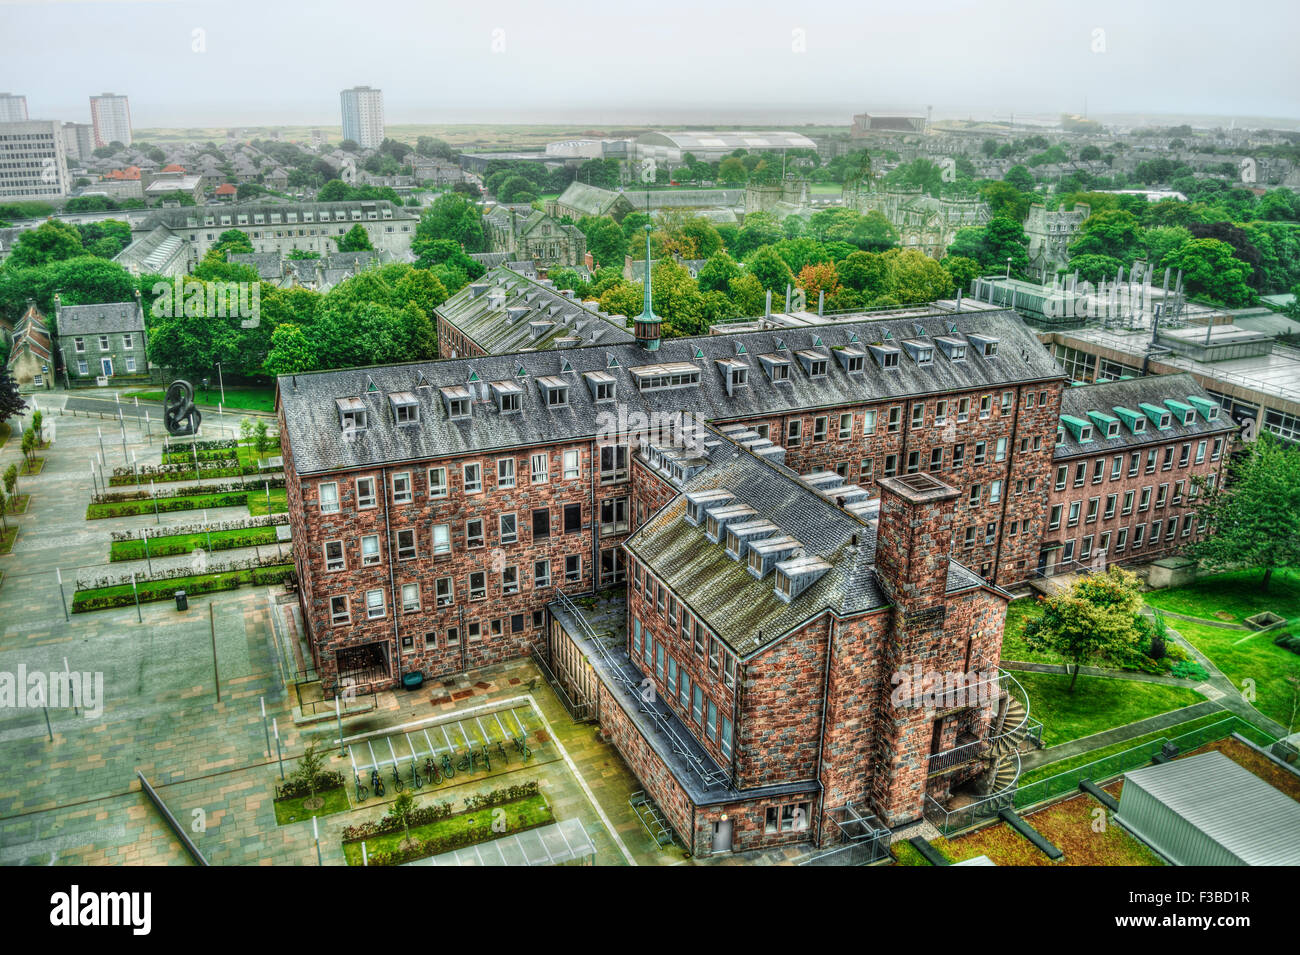 September 2015, campus and main building of the university in Aberdeen, HDR-technique Stock Photo